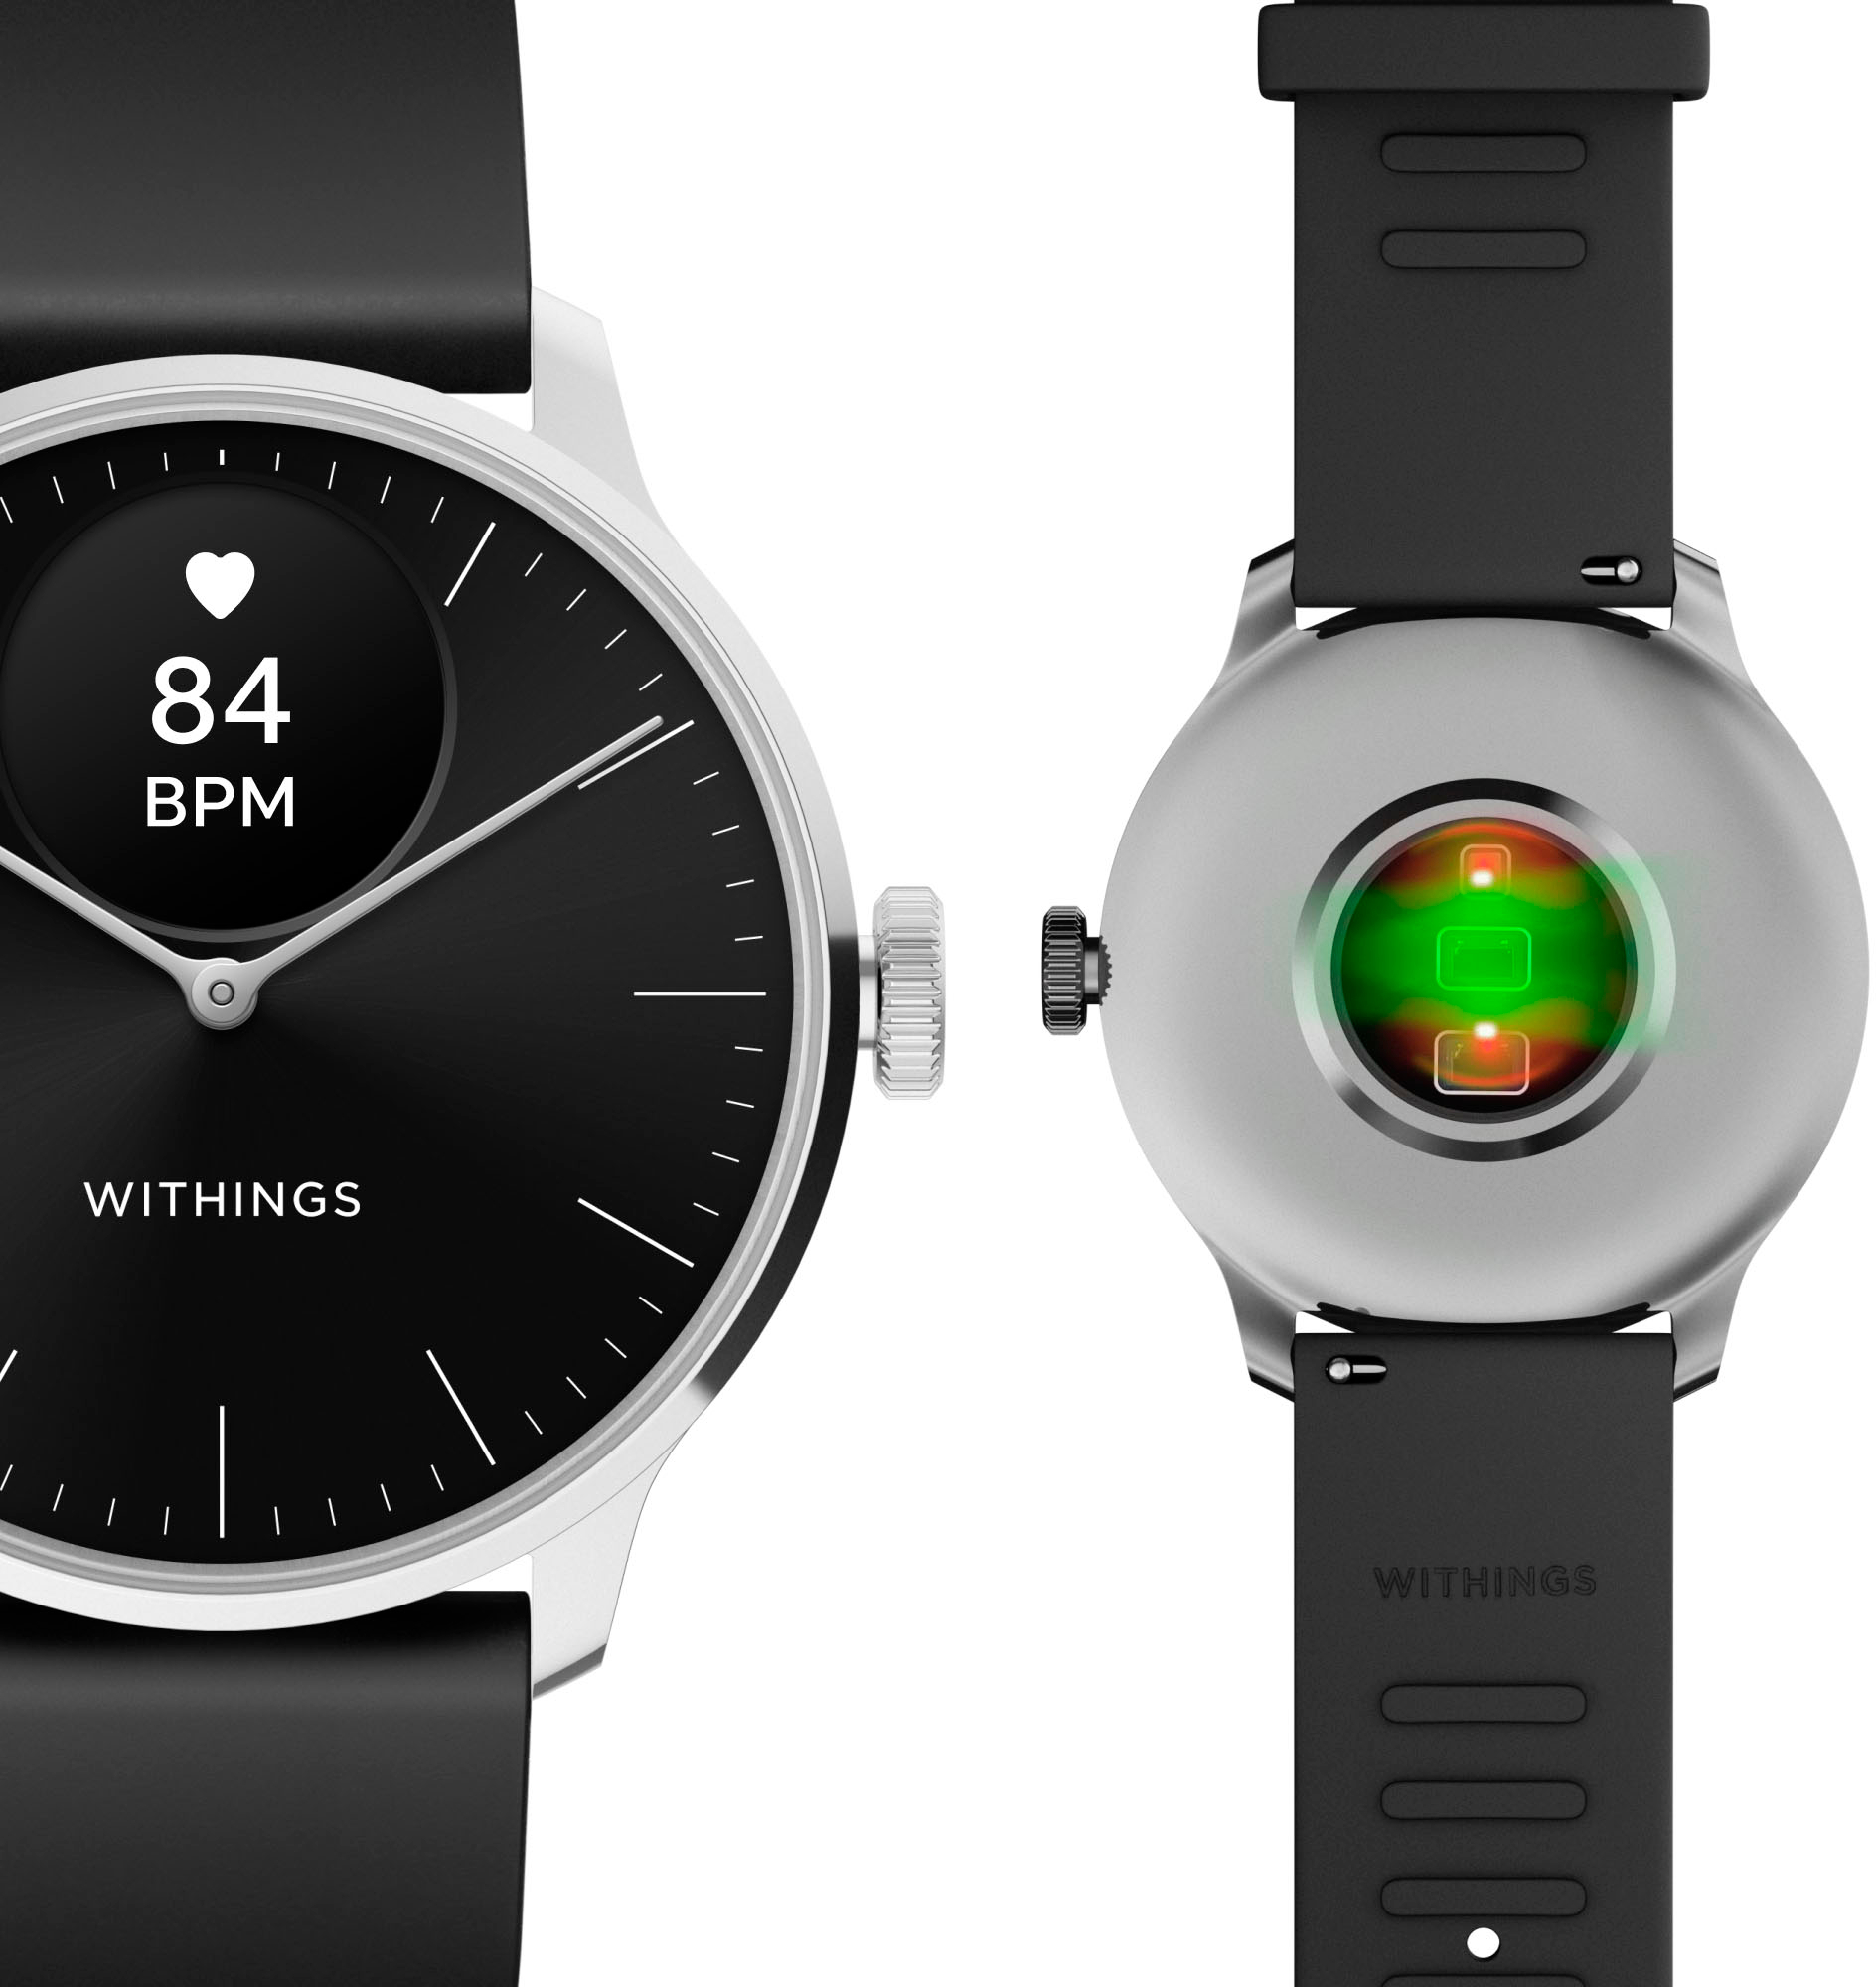 Smarter Hybrid Watches: Withings Launches ScanWatch 2 and